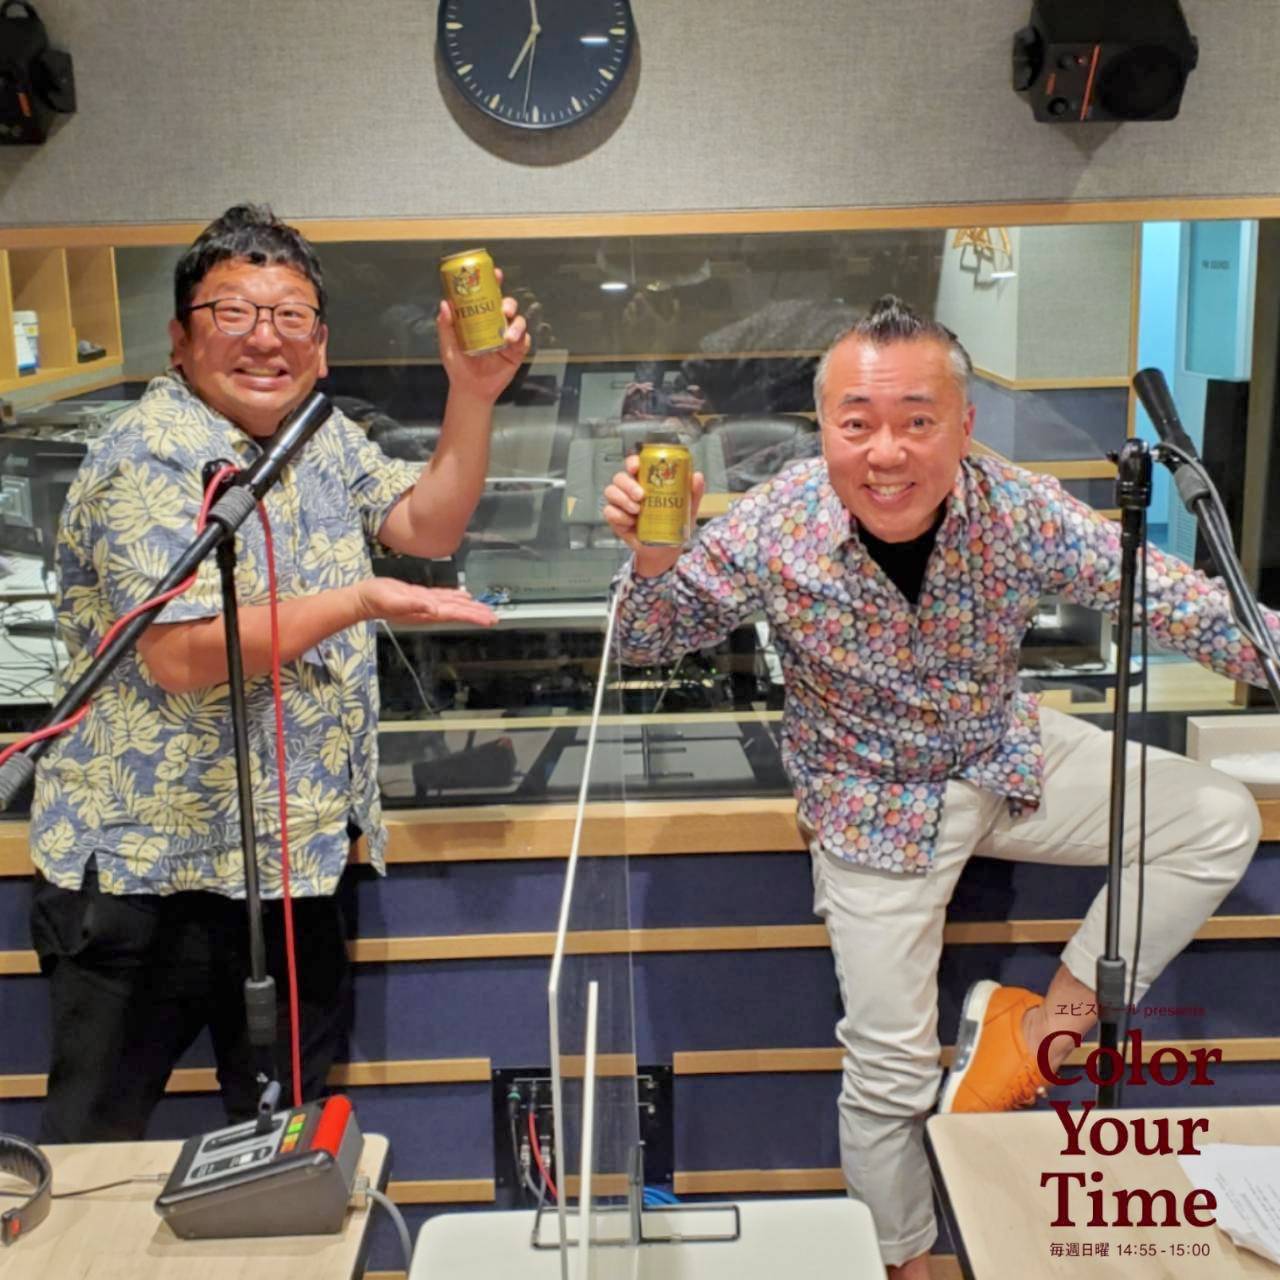 TIM、ゴルゴ松本さんヱビスビール presents Color Your Time_vol.4